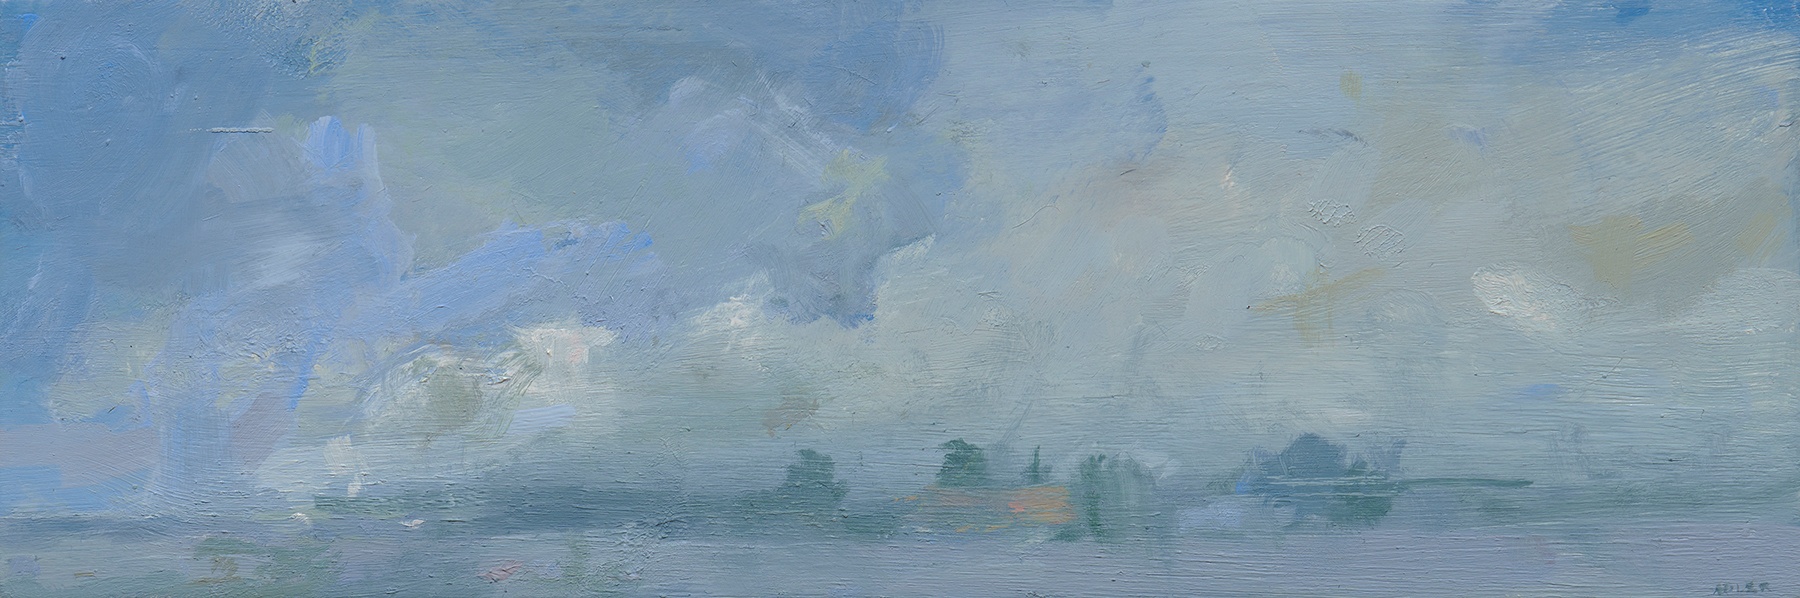 Laura Adler Shoreline with Clouds, 2020 oil on panel 4 x 12 in.